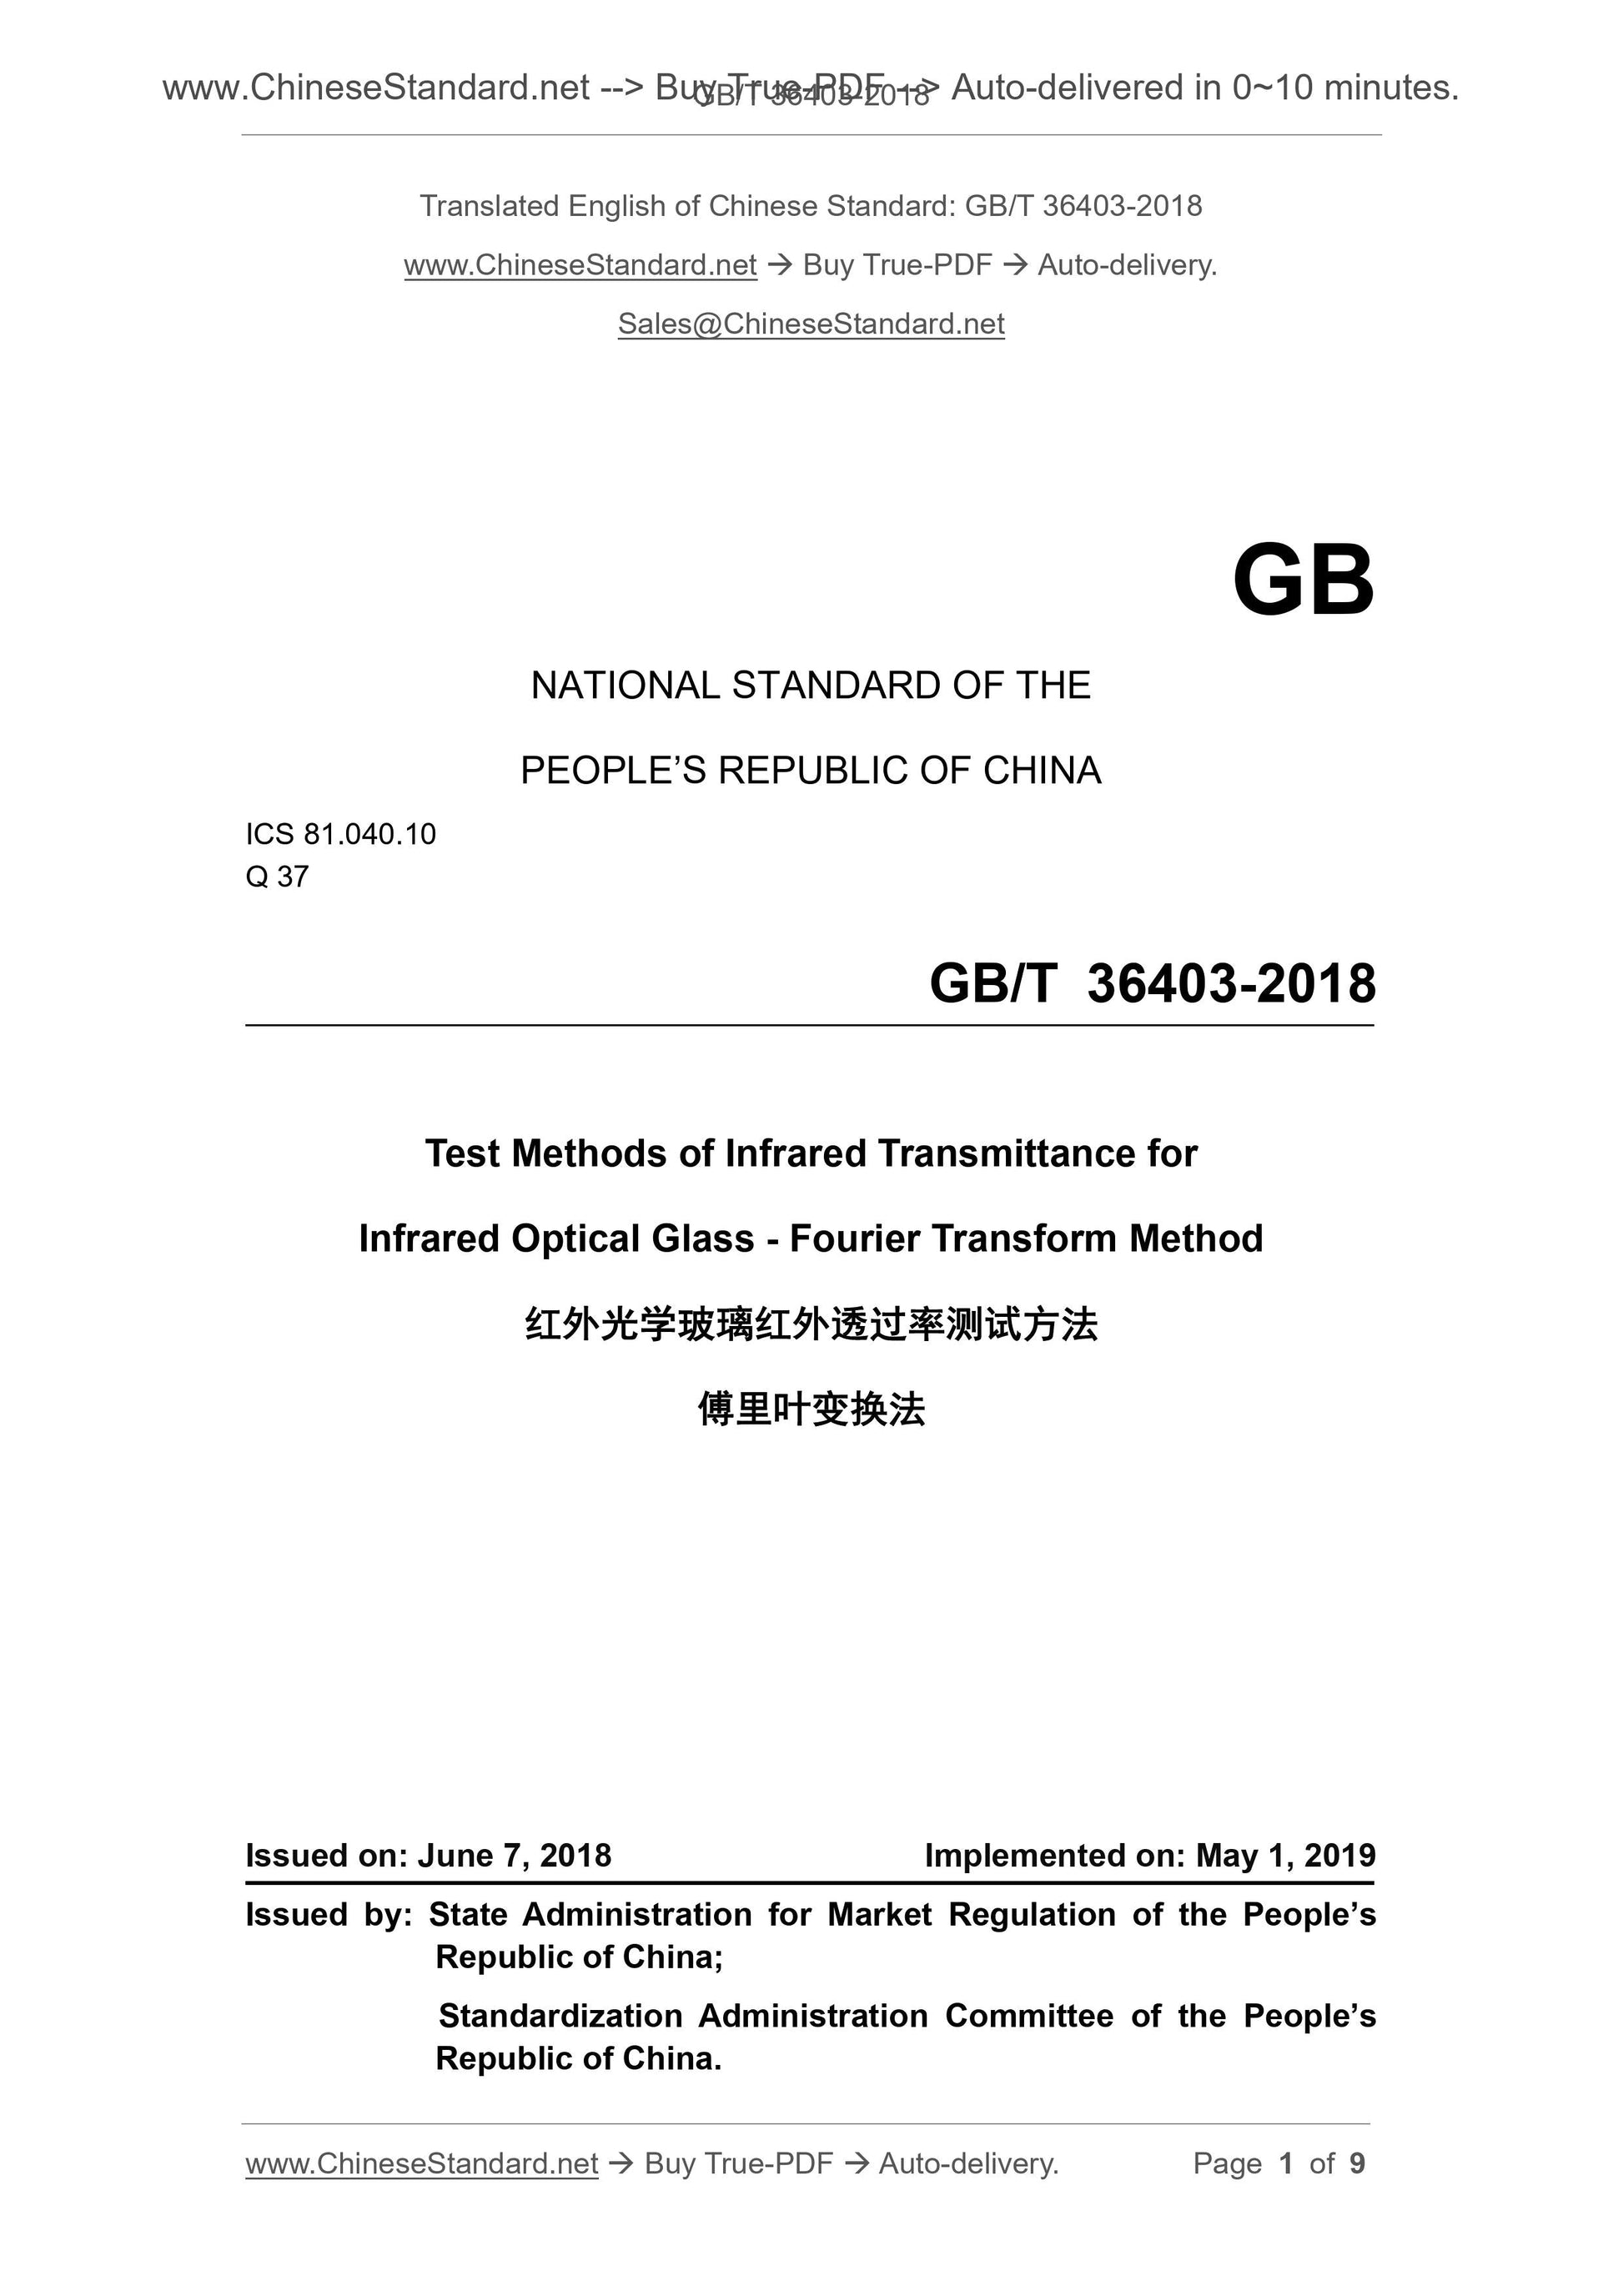 GB/T 36403-2018 Page 1